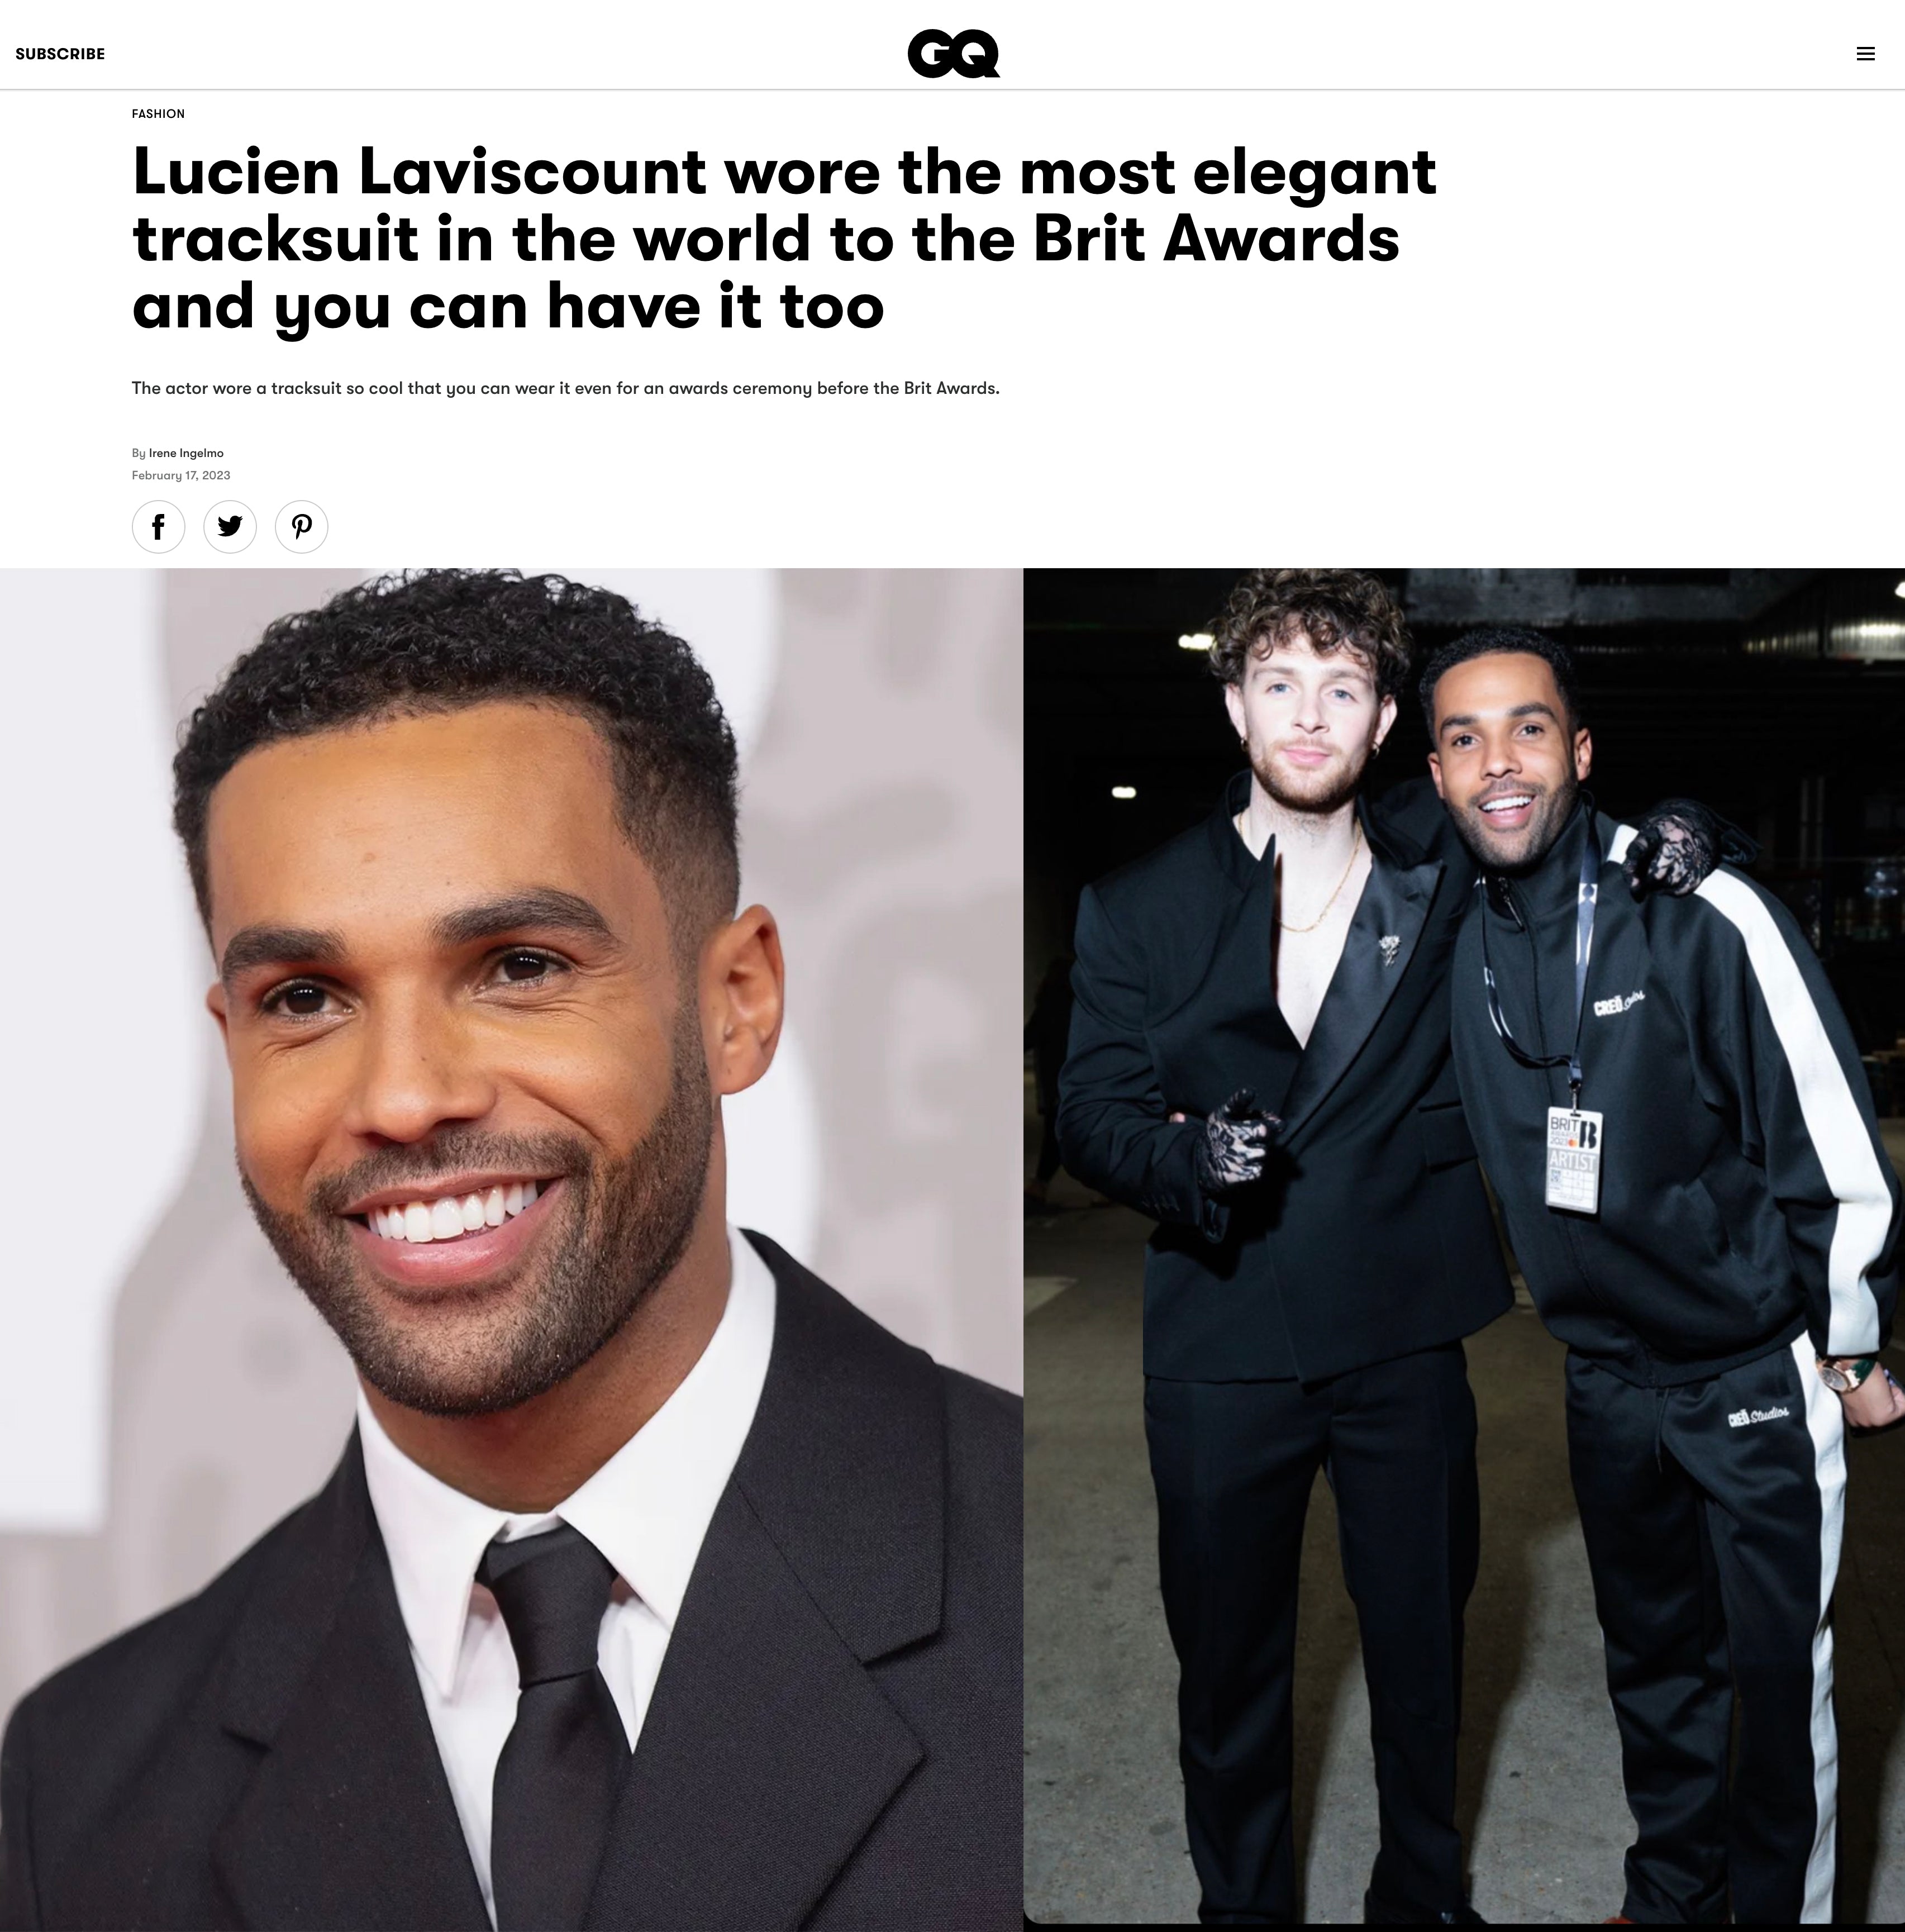 Lucien Laviscount wore the most elegant tracksuit in the world to the Brit Awards and you can have it too